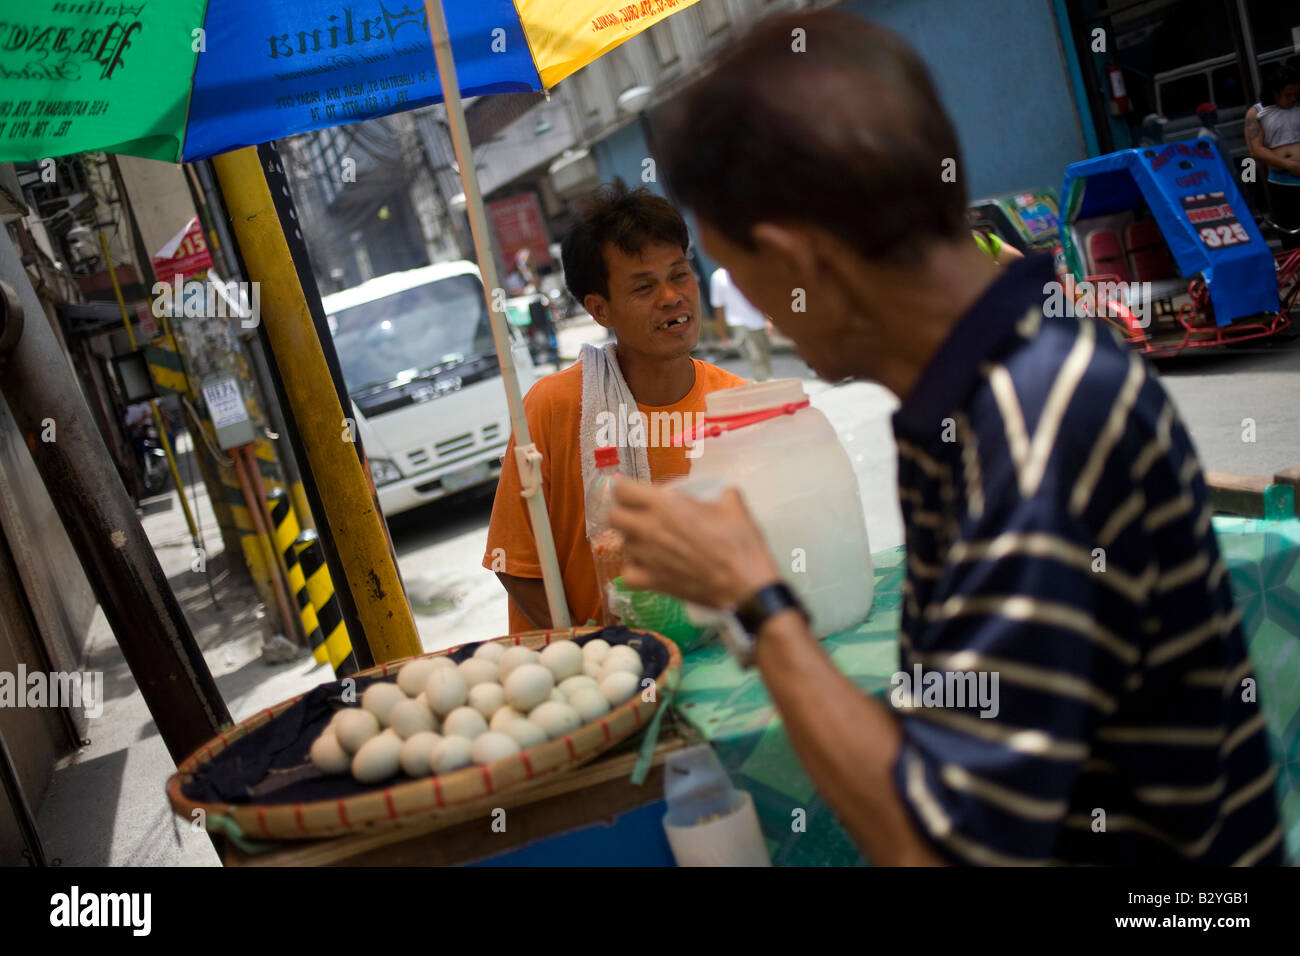 A food vendor selling balut on the street in Manila, Philippines. Stock Photo